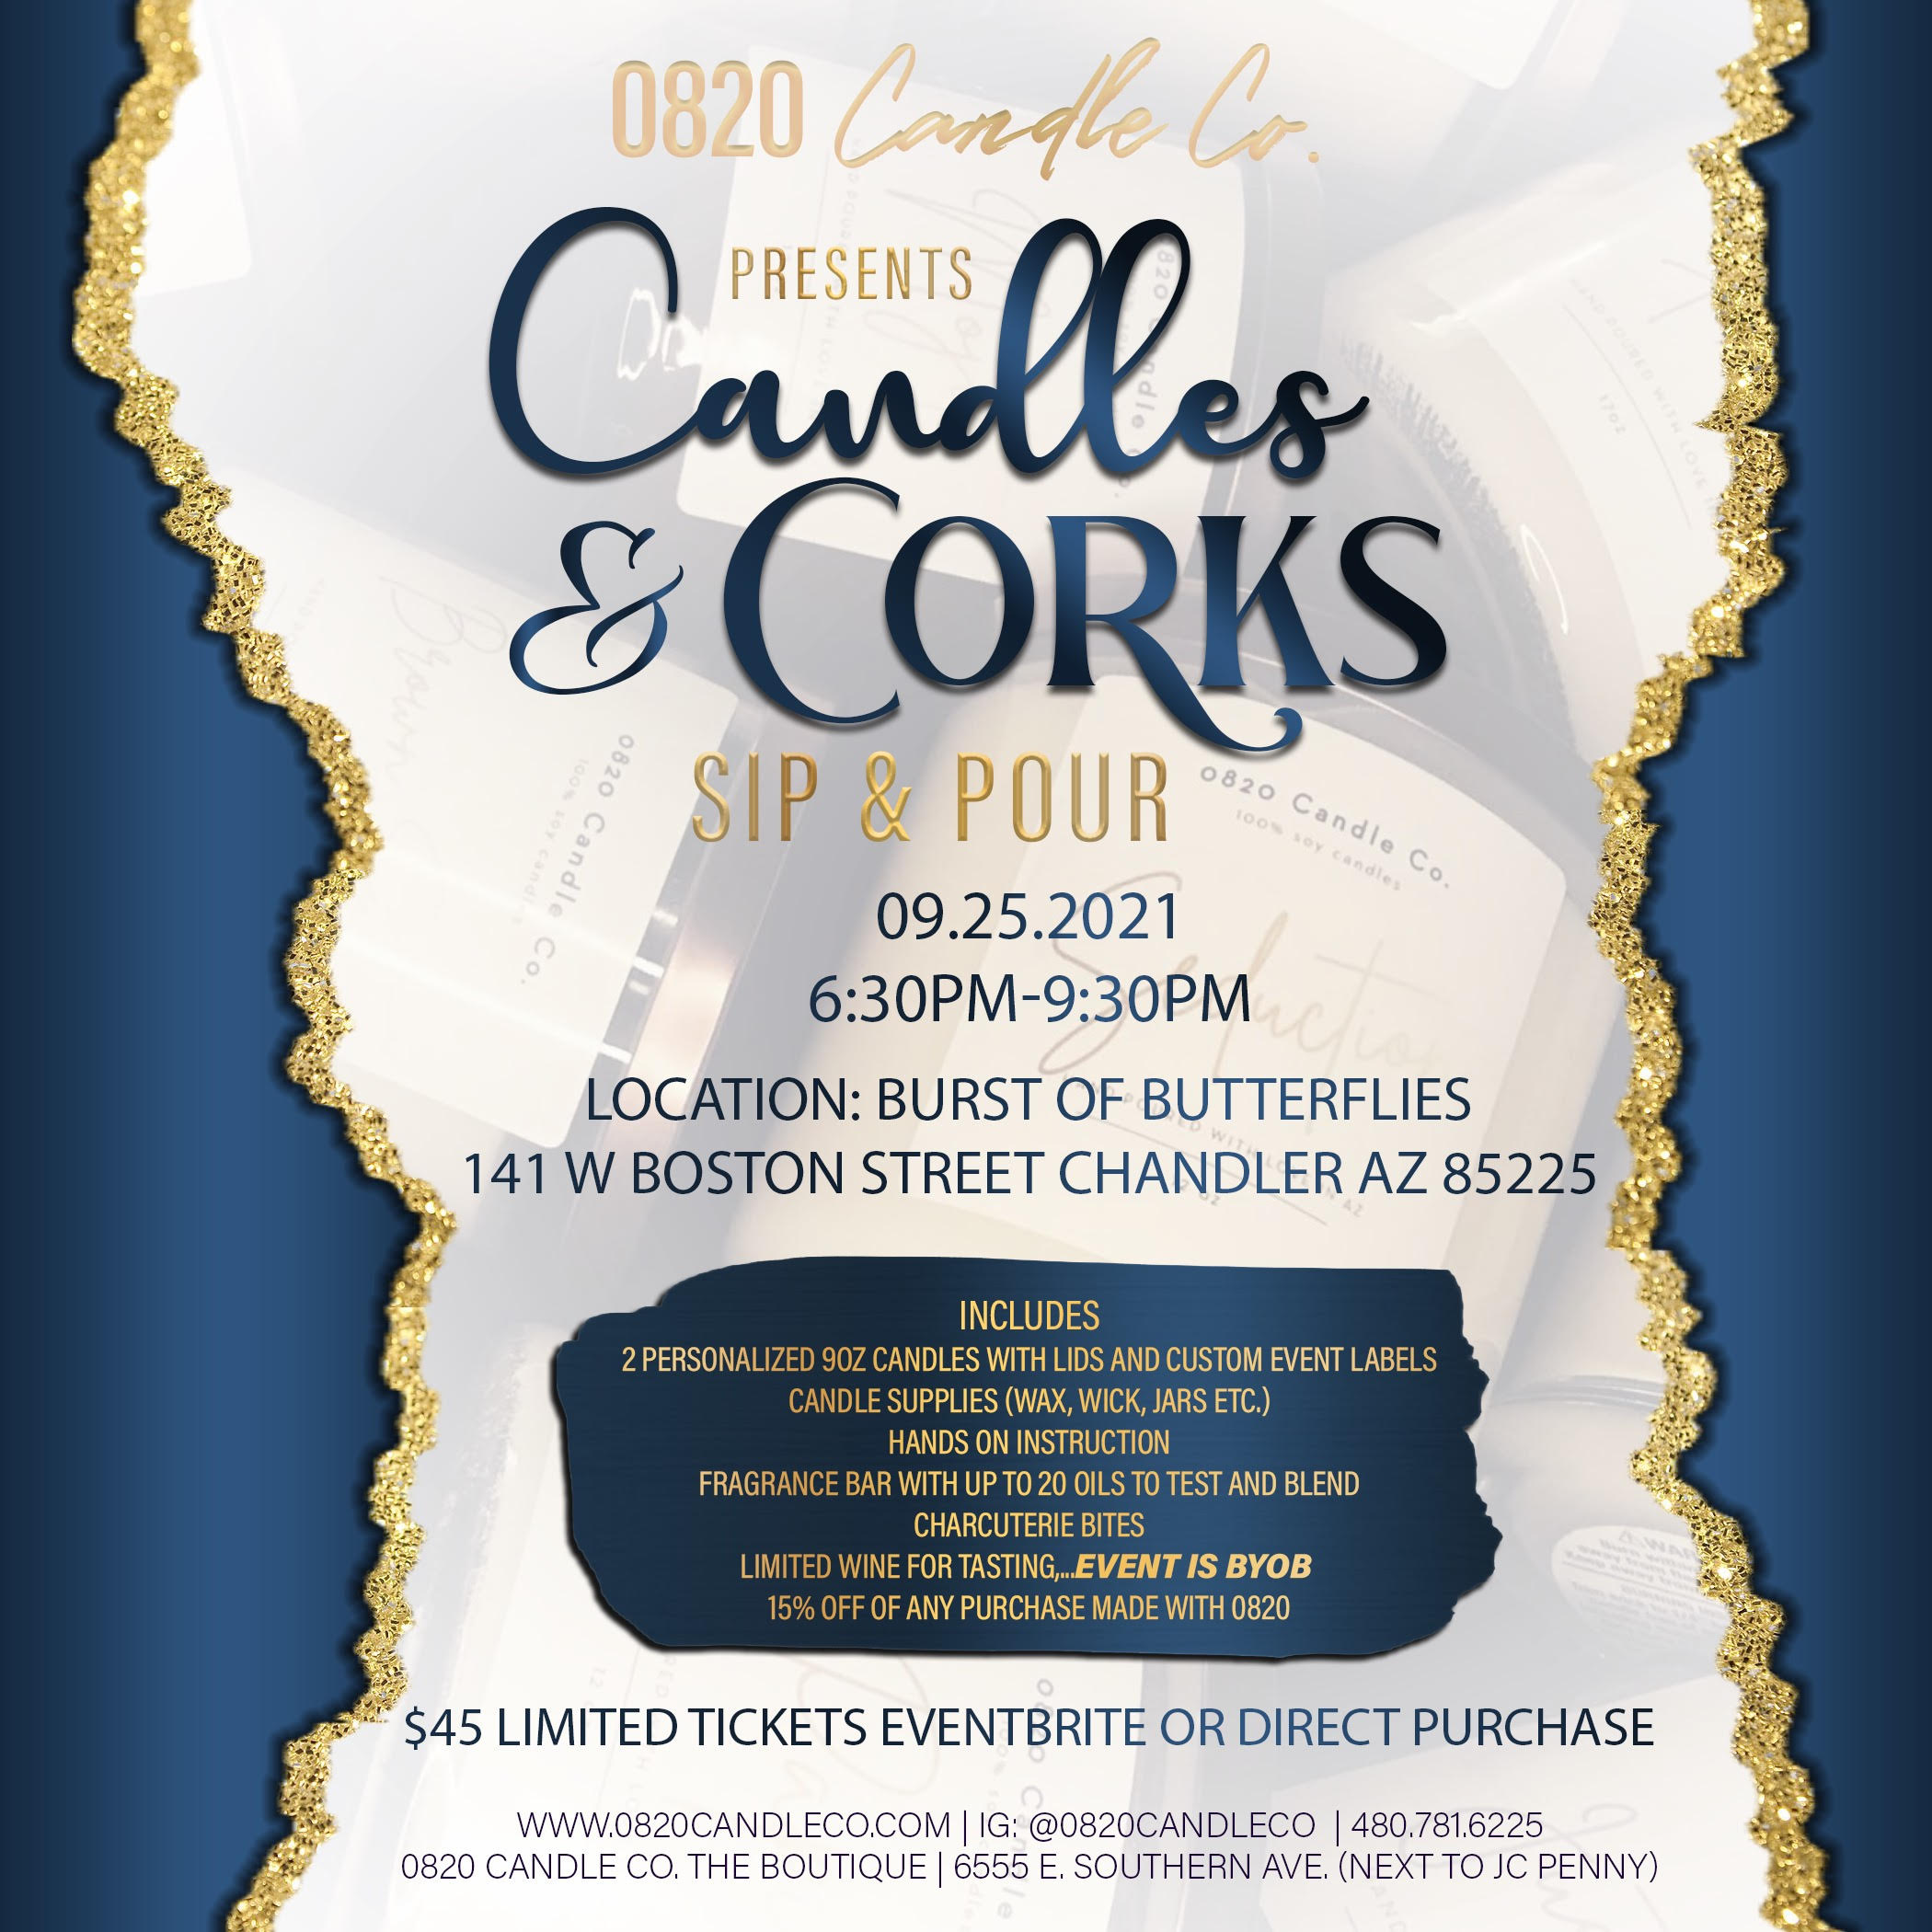 Corks & Candles - Candle Making